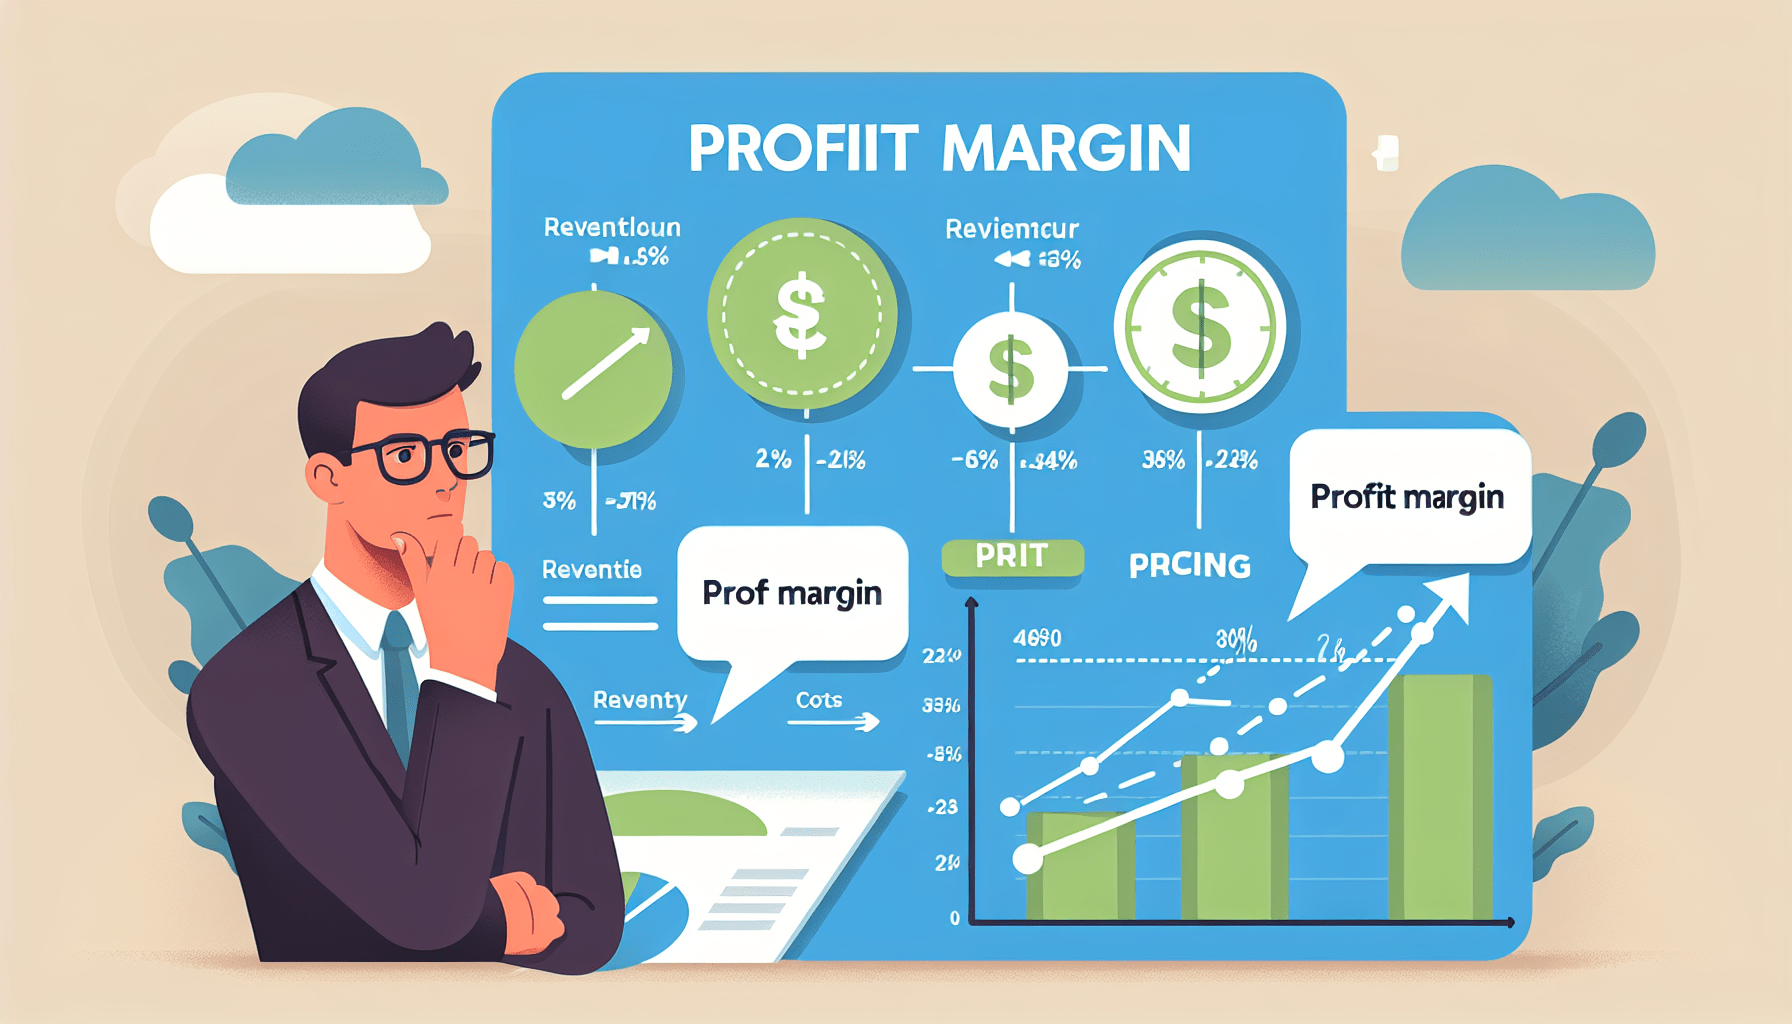 What Is A Good Profit Margin For A Small Business?